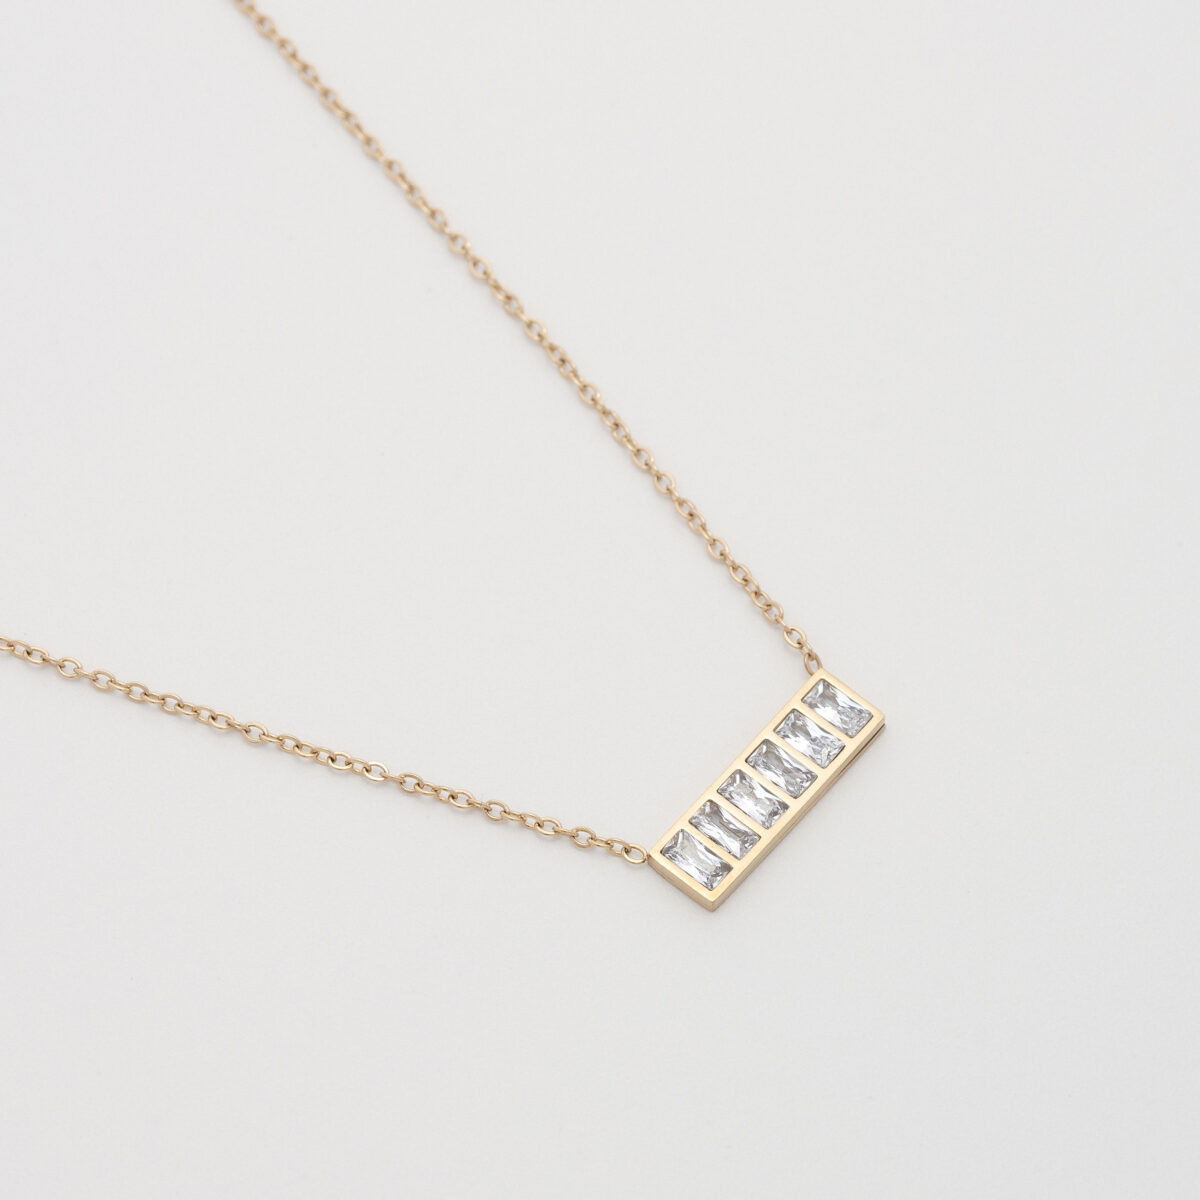 https://m.clubbella.co/product/solitaire-bar-necklace/ GALA BAR NECKLACE (4)